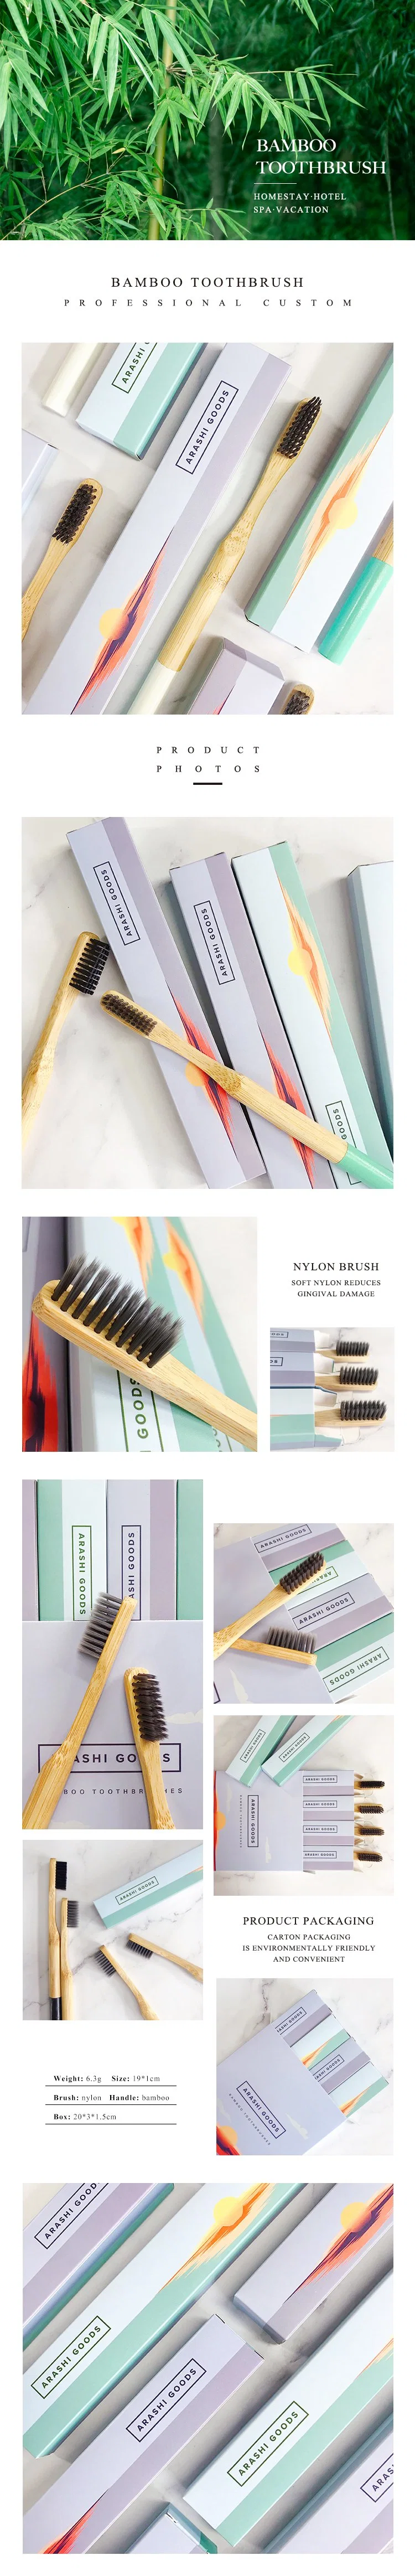 Customized Toothbrush Set Biodegradable Eco-Friendly Charcoal Bristles Bamboo Toothbrush